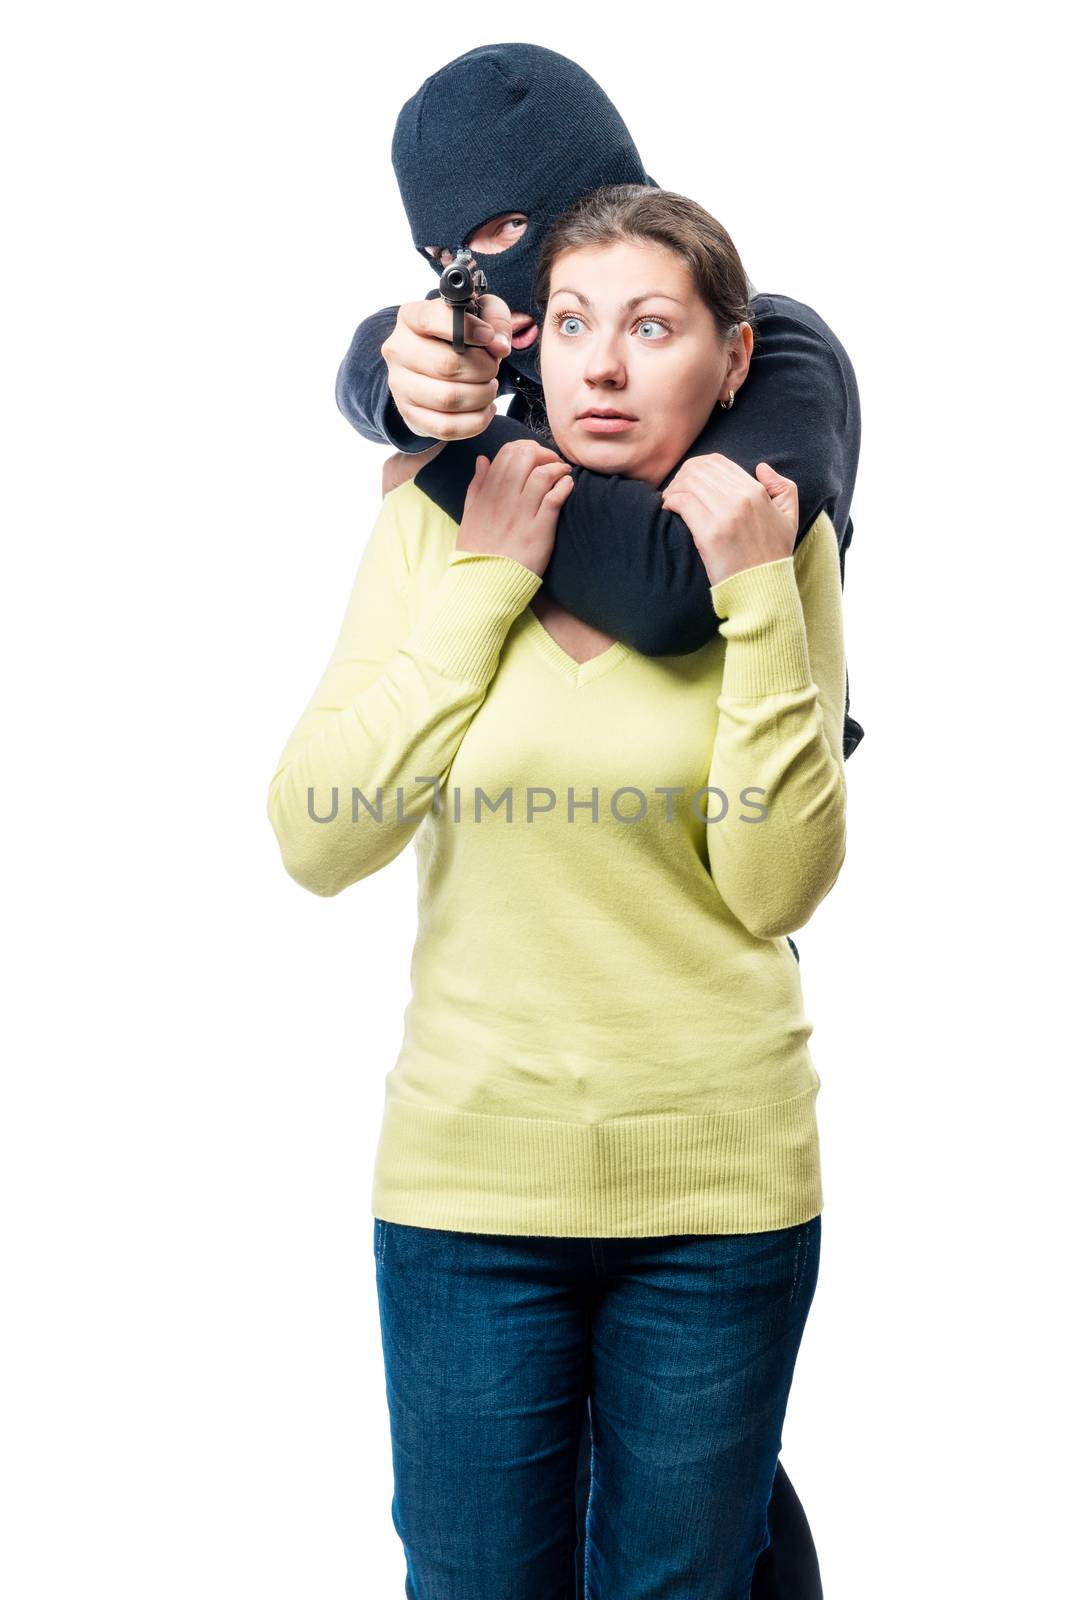 terrorist with his victim on a white background isolated by kosmsos111